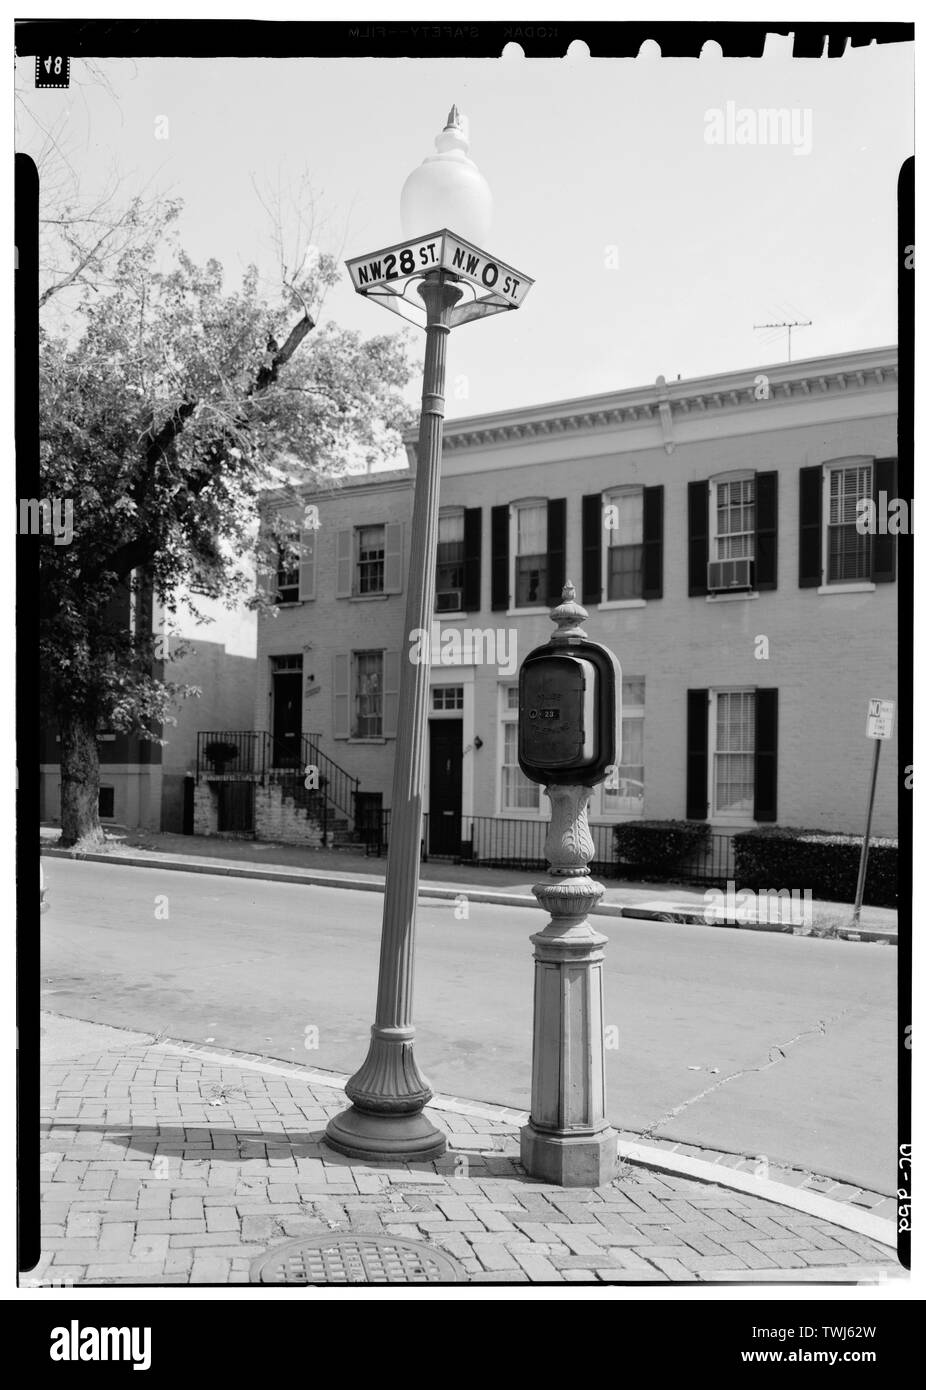 September 1969 CALL BOX AND STREET LAMP 28th AND O STREETS, N.W. - Georgetown Street Furniture, Georgetown Vicinity, Washington, District of Columbia, DC Stock Photo